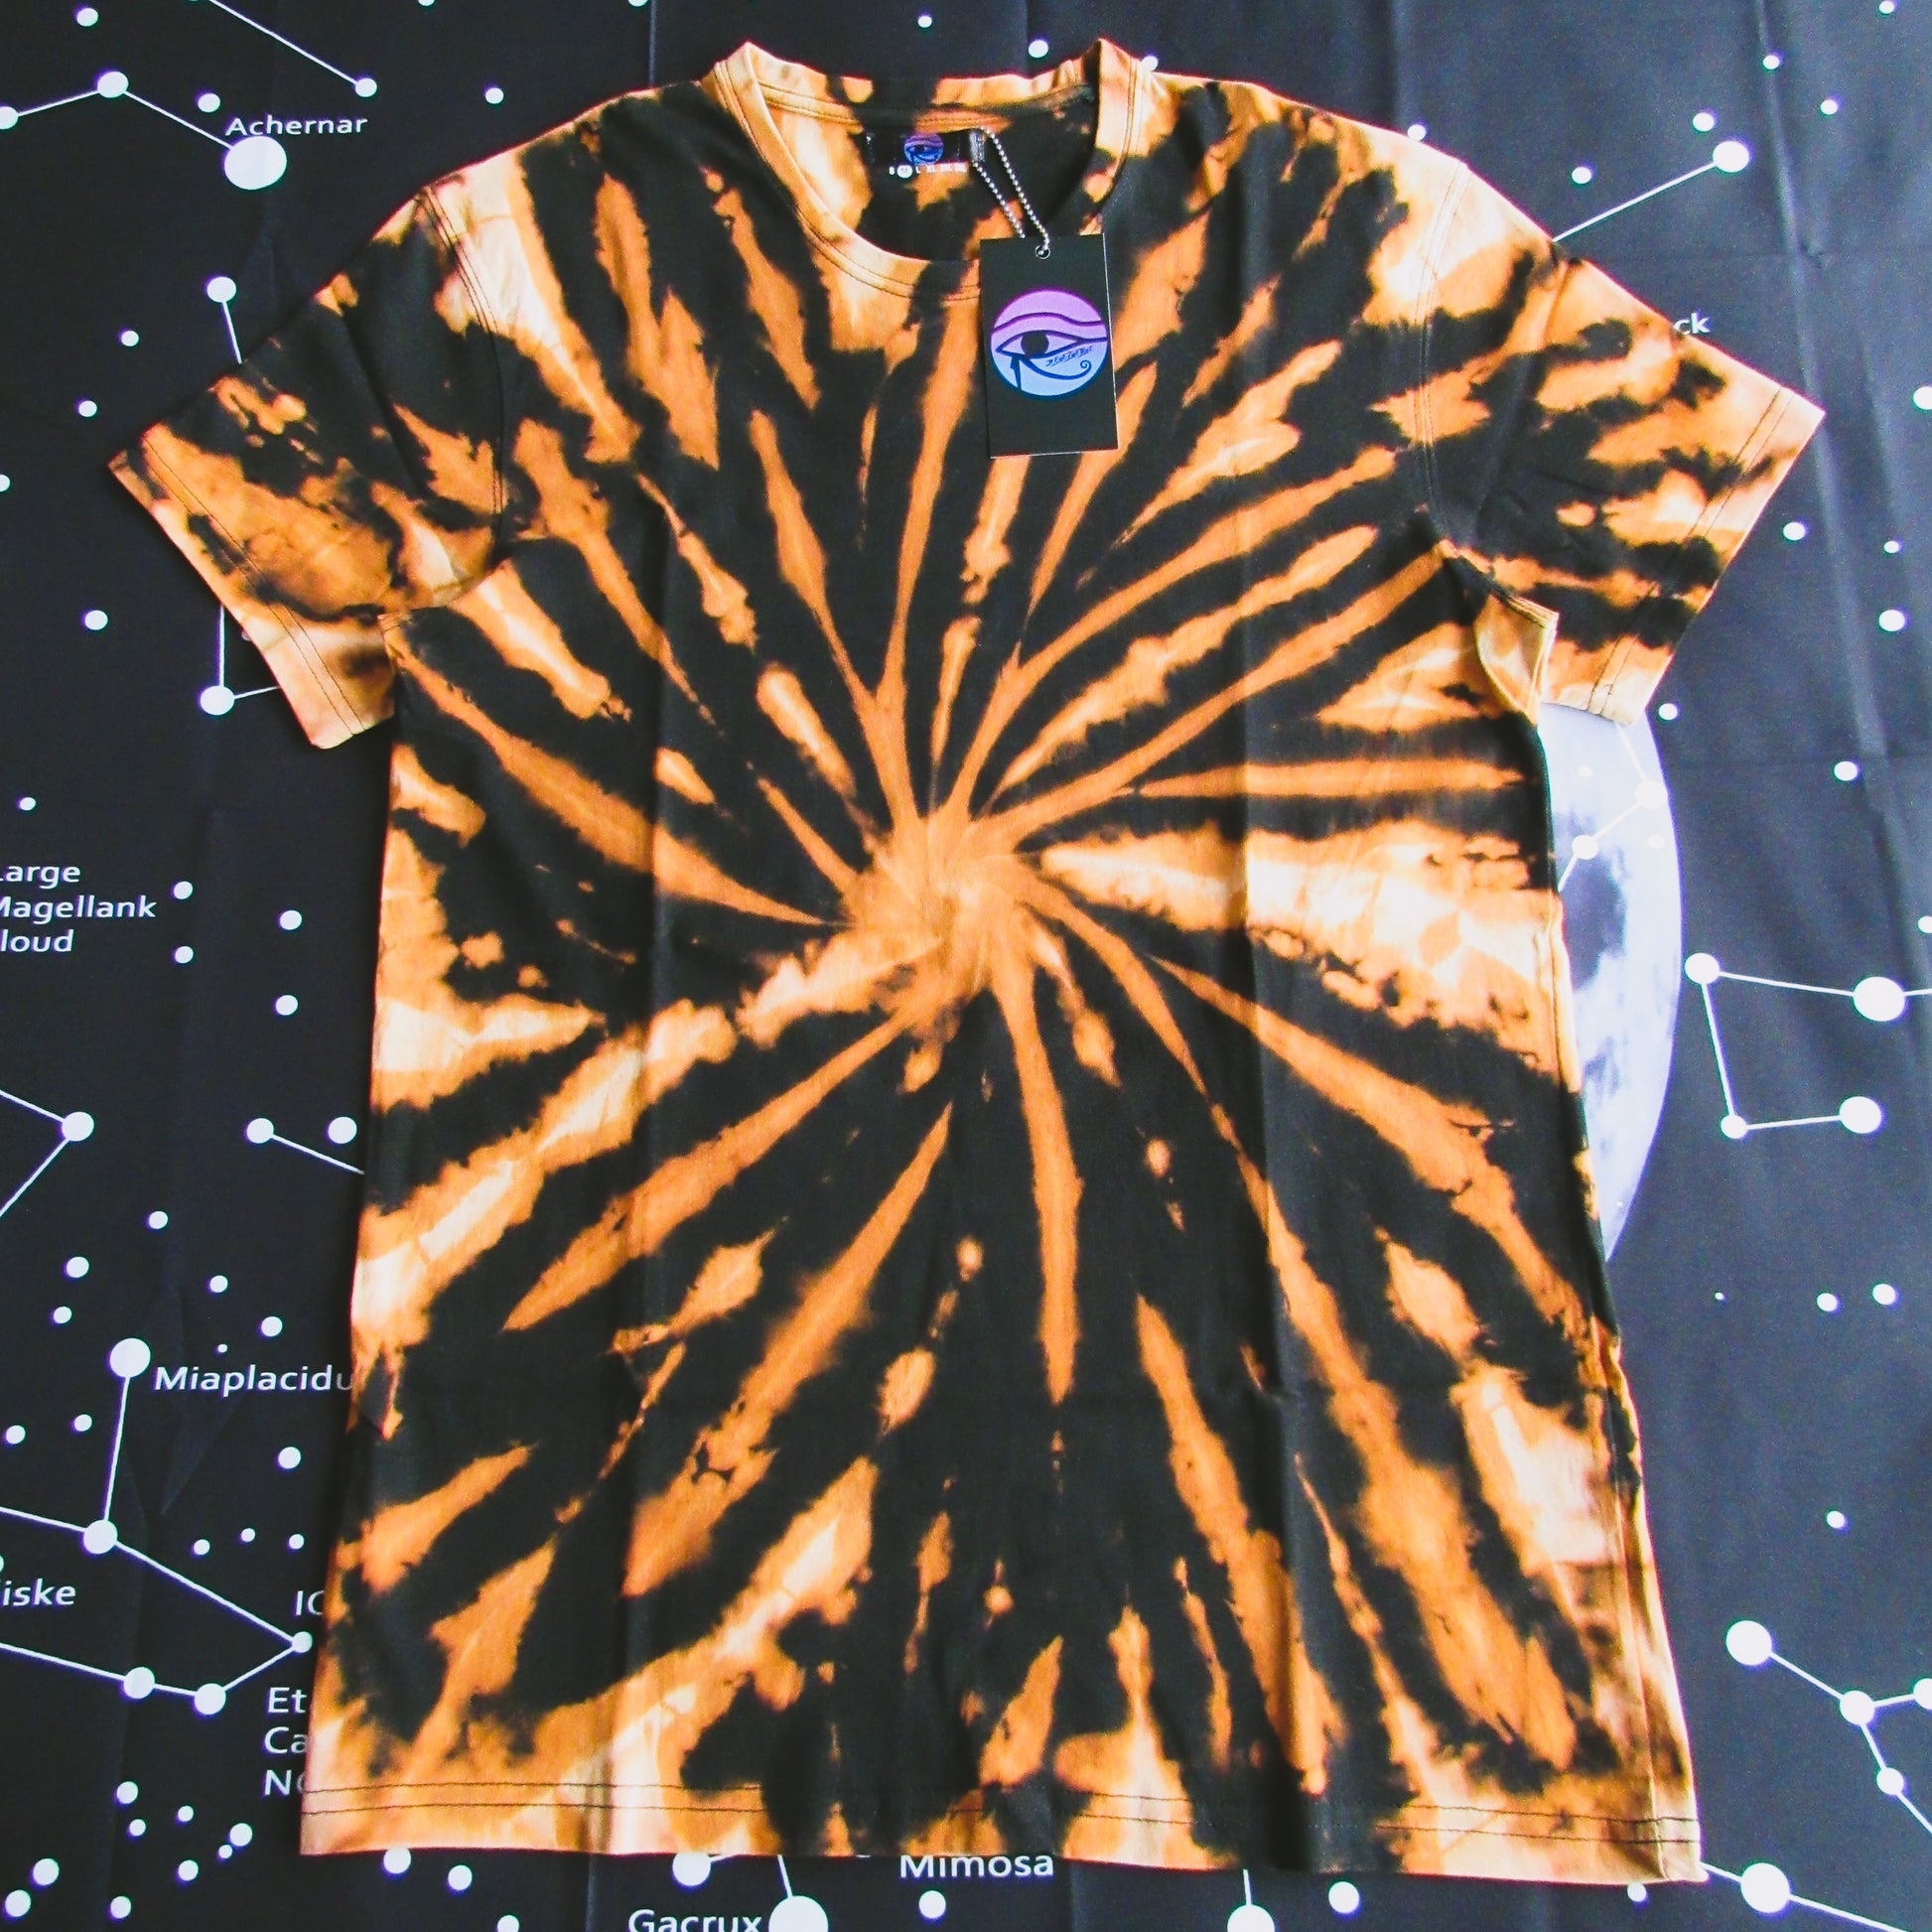 The softest T-shirts to use for tie-dye : r/tiedye